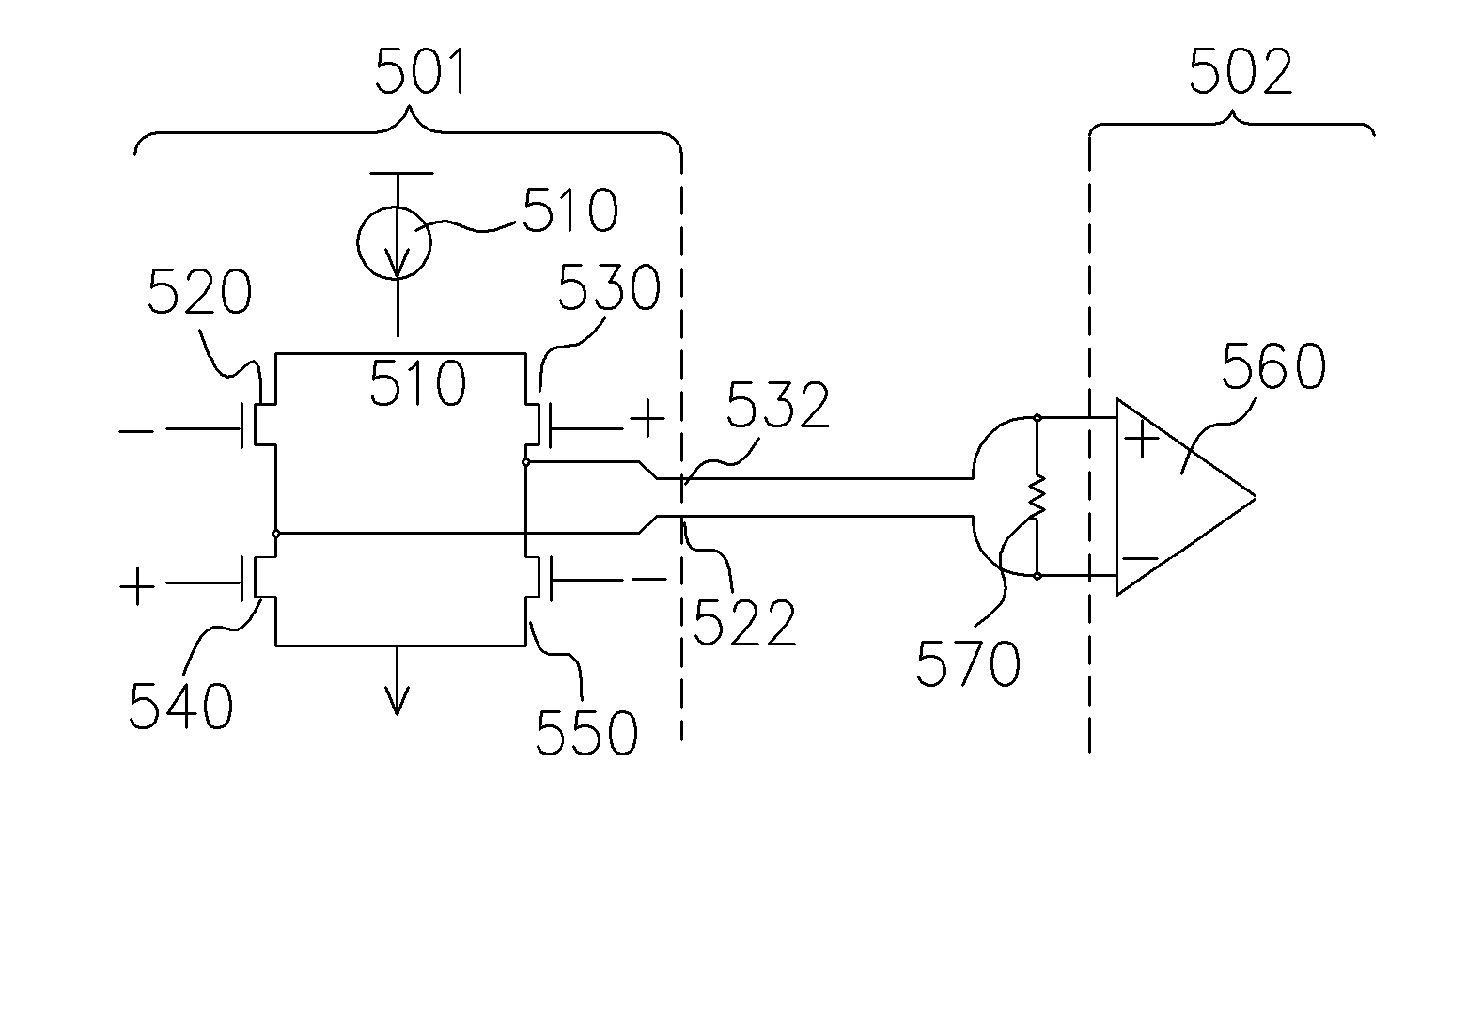 [cascade driving circuit for liquid crystal display]